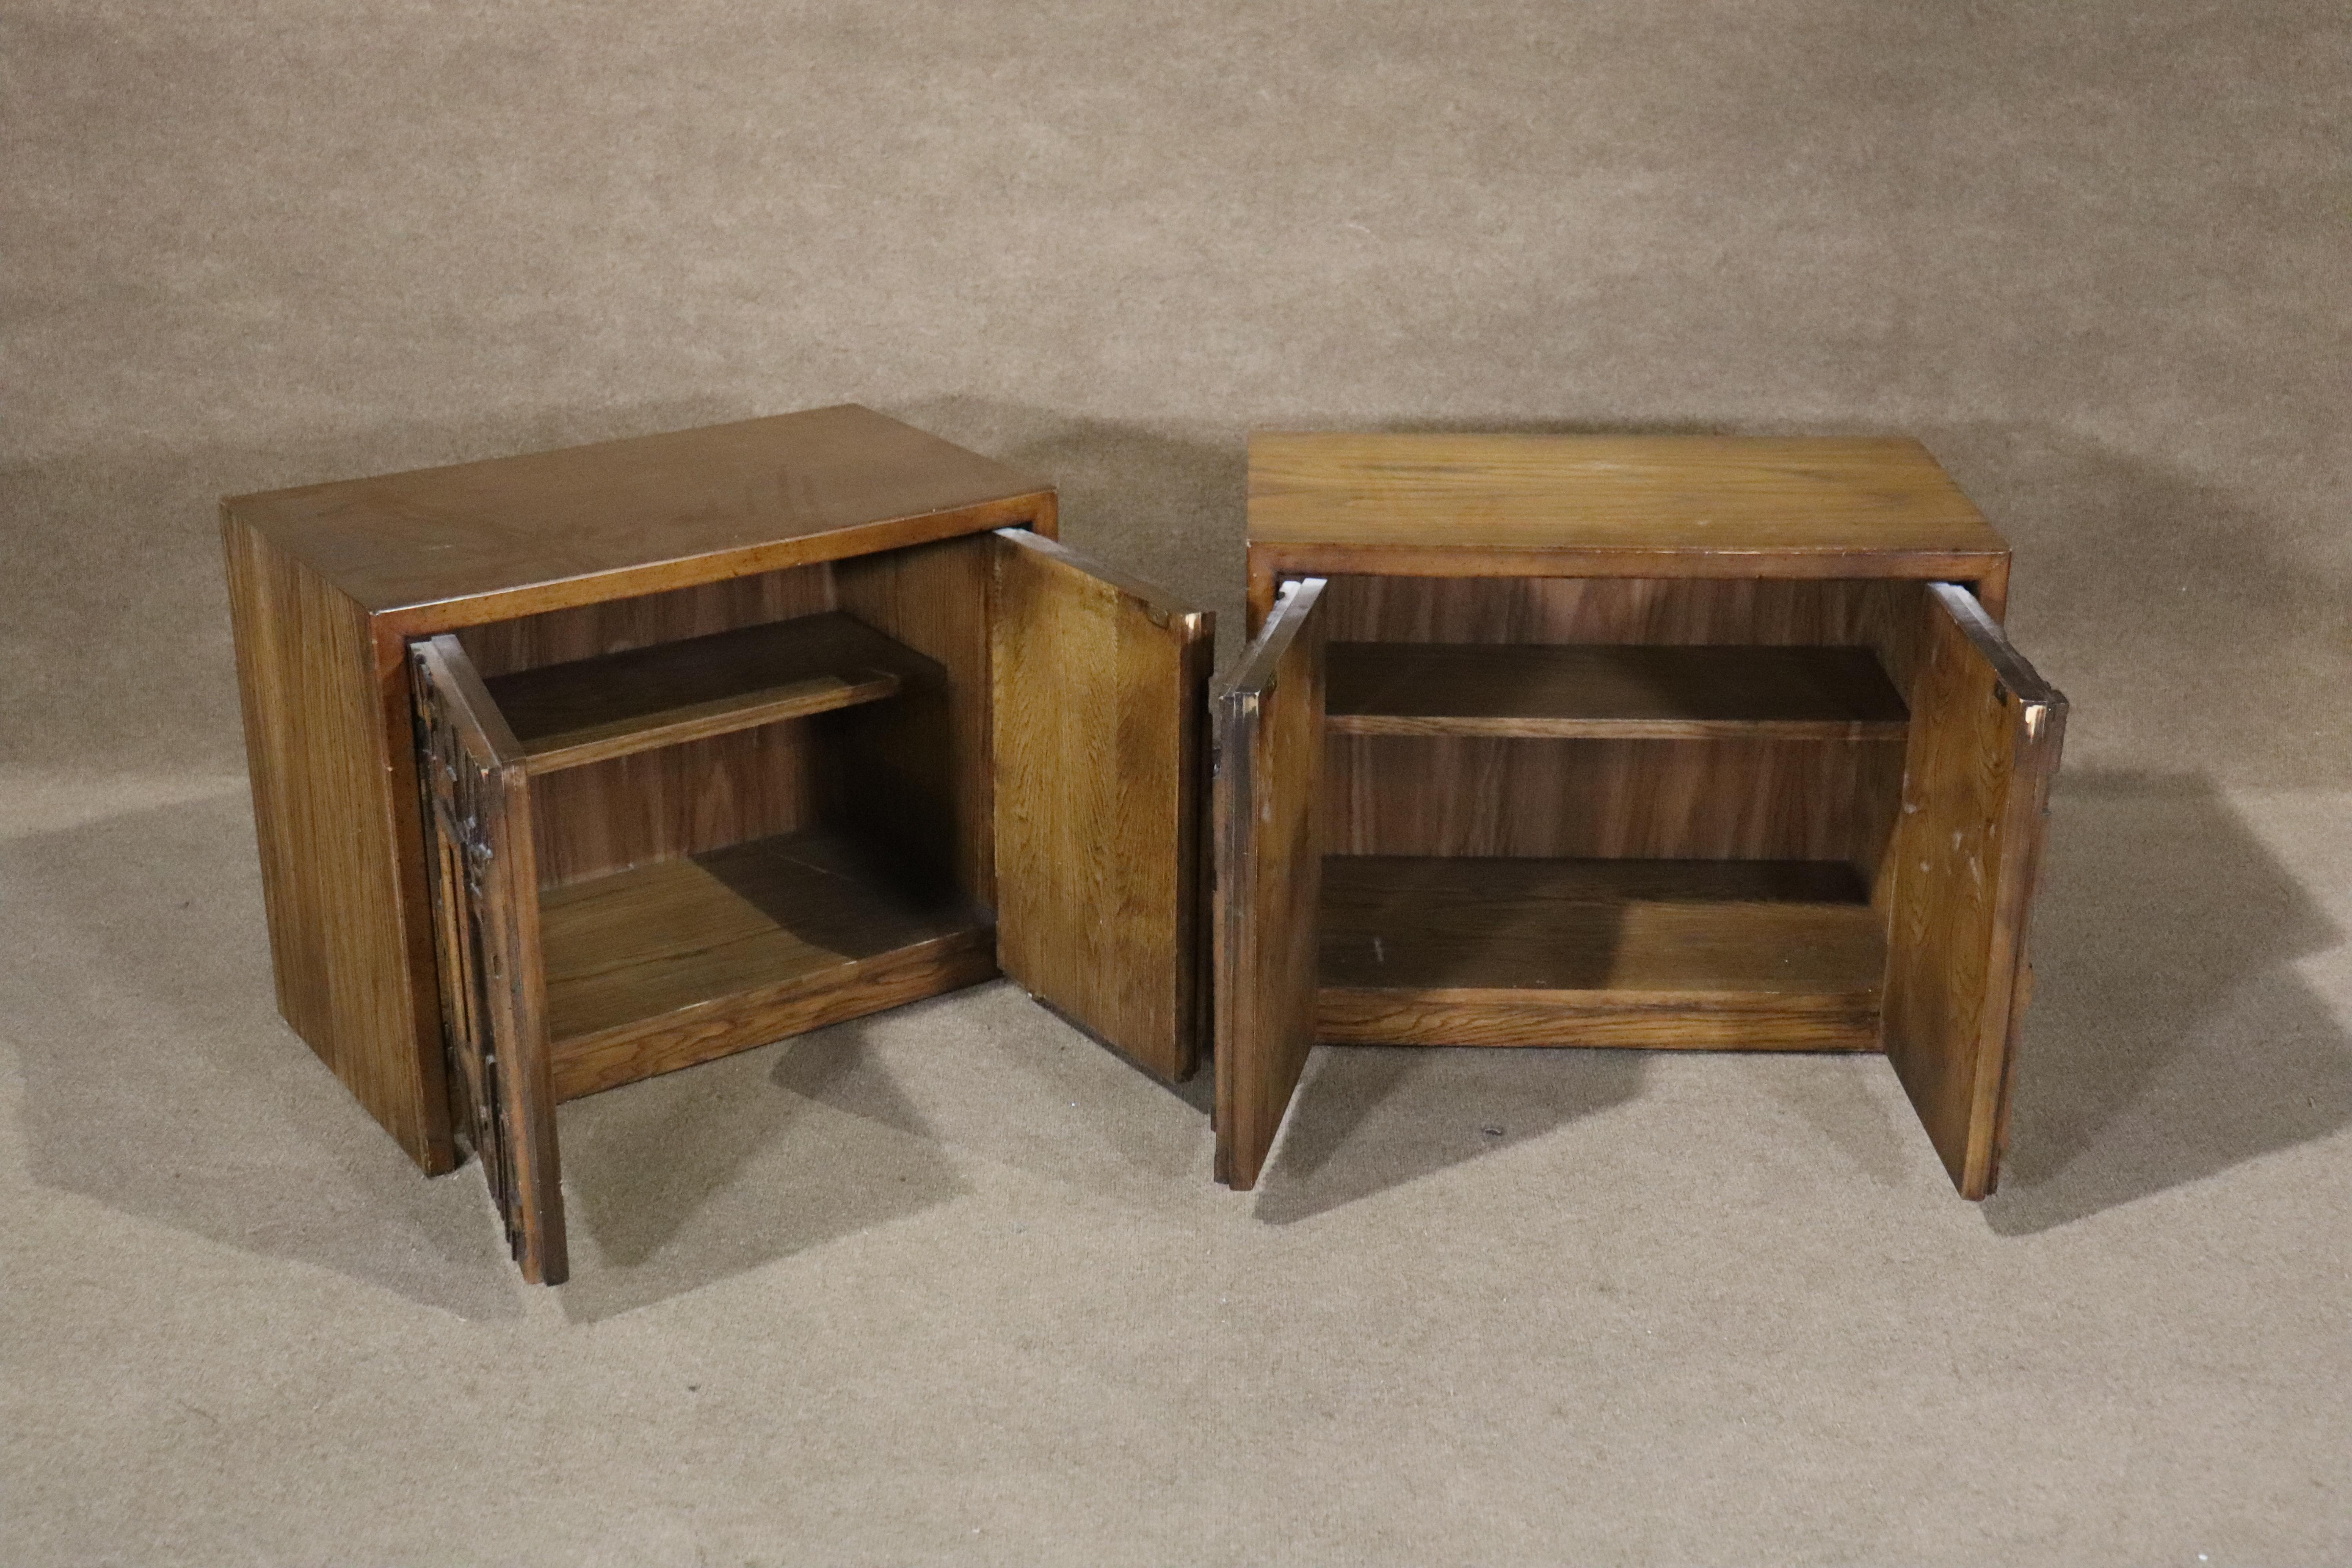 Pair of vintage mid-century end tables by Lane Furniture with mosaic style fronts. Two door cabinets with shelving. Perfect for bedroom and living room storage.
Please confirm location NY or NJ